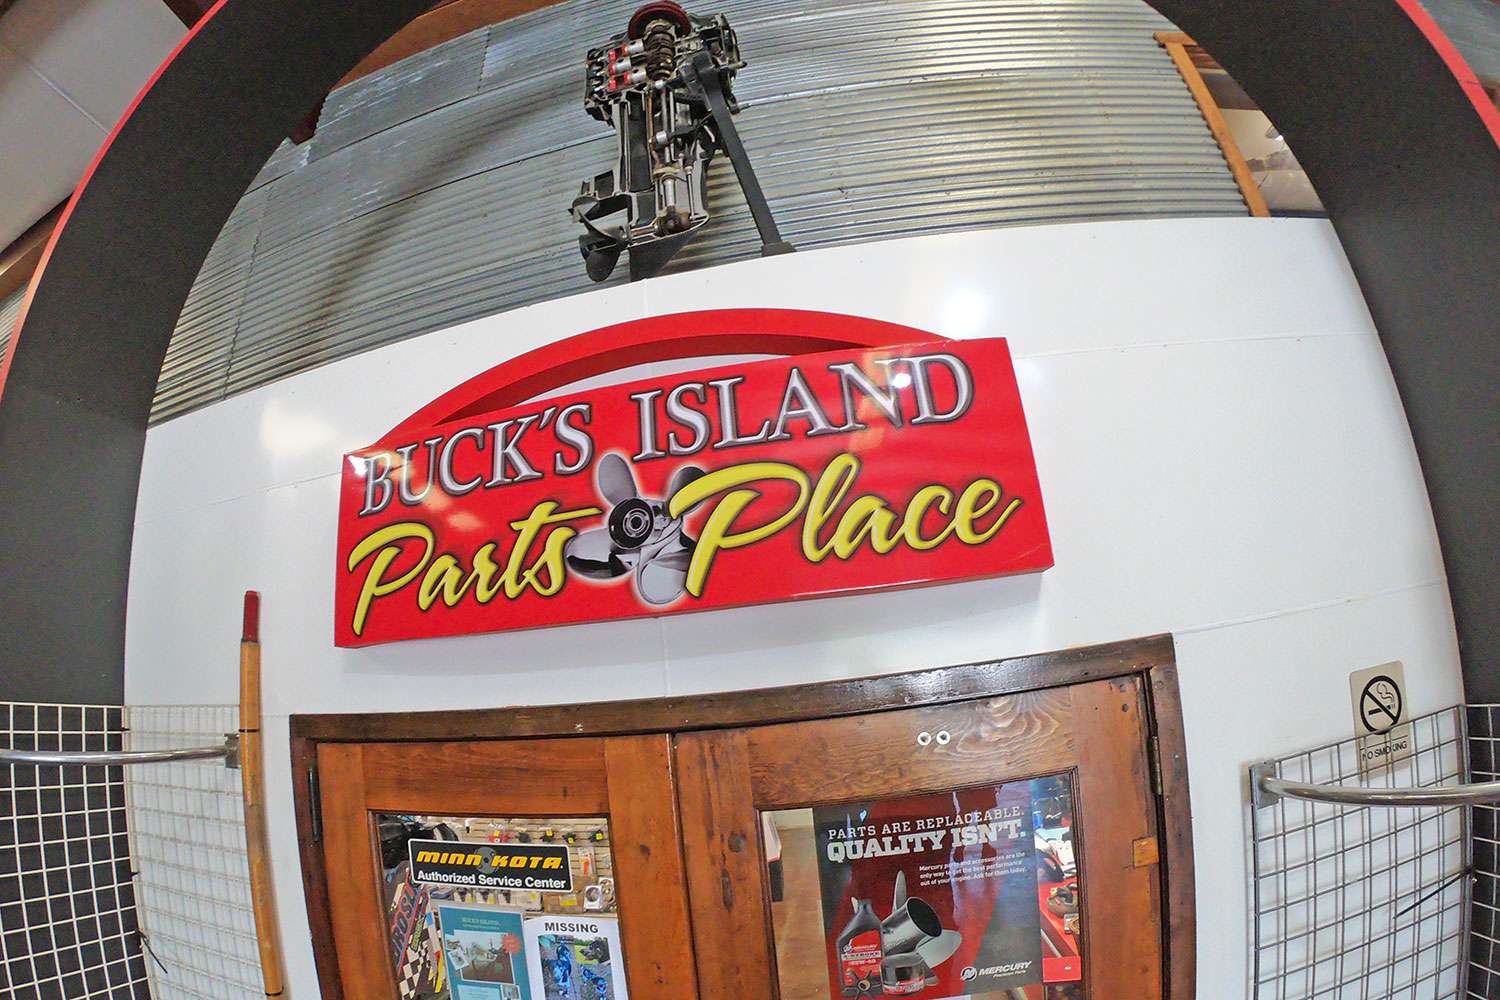 Buck's Island is a full-service marina that not only can fix your rig, but they also offer a full line of fiberglass and aluminum boats, including Skeeter, G3 and Falcon boats. 